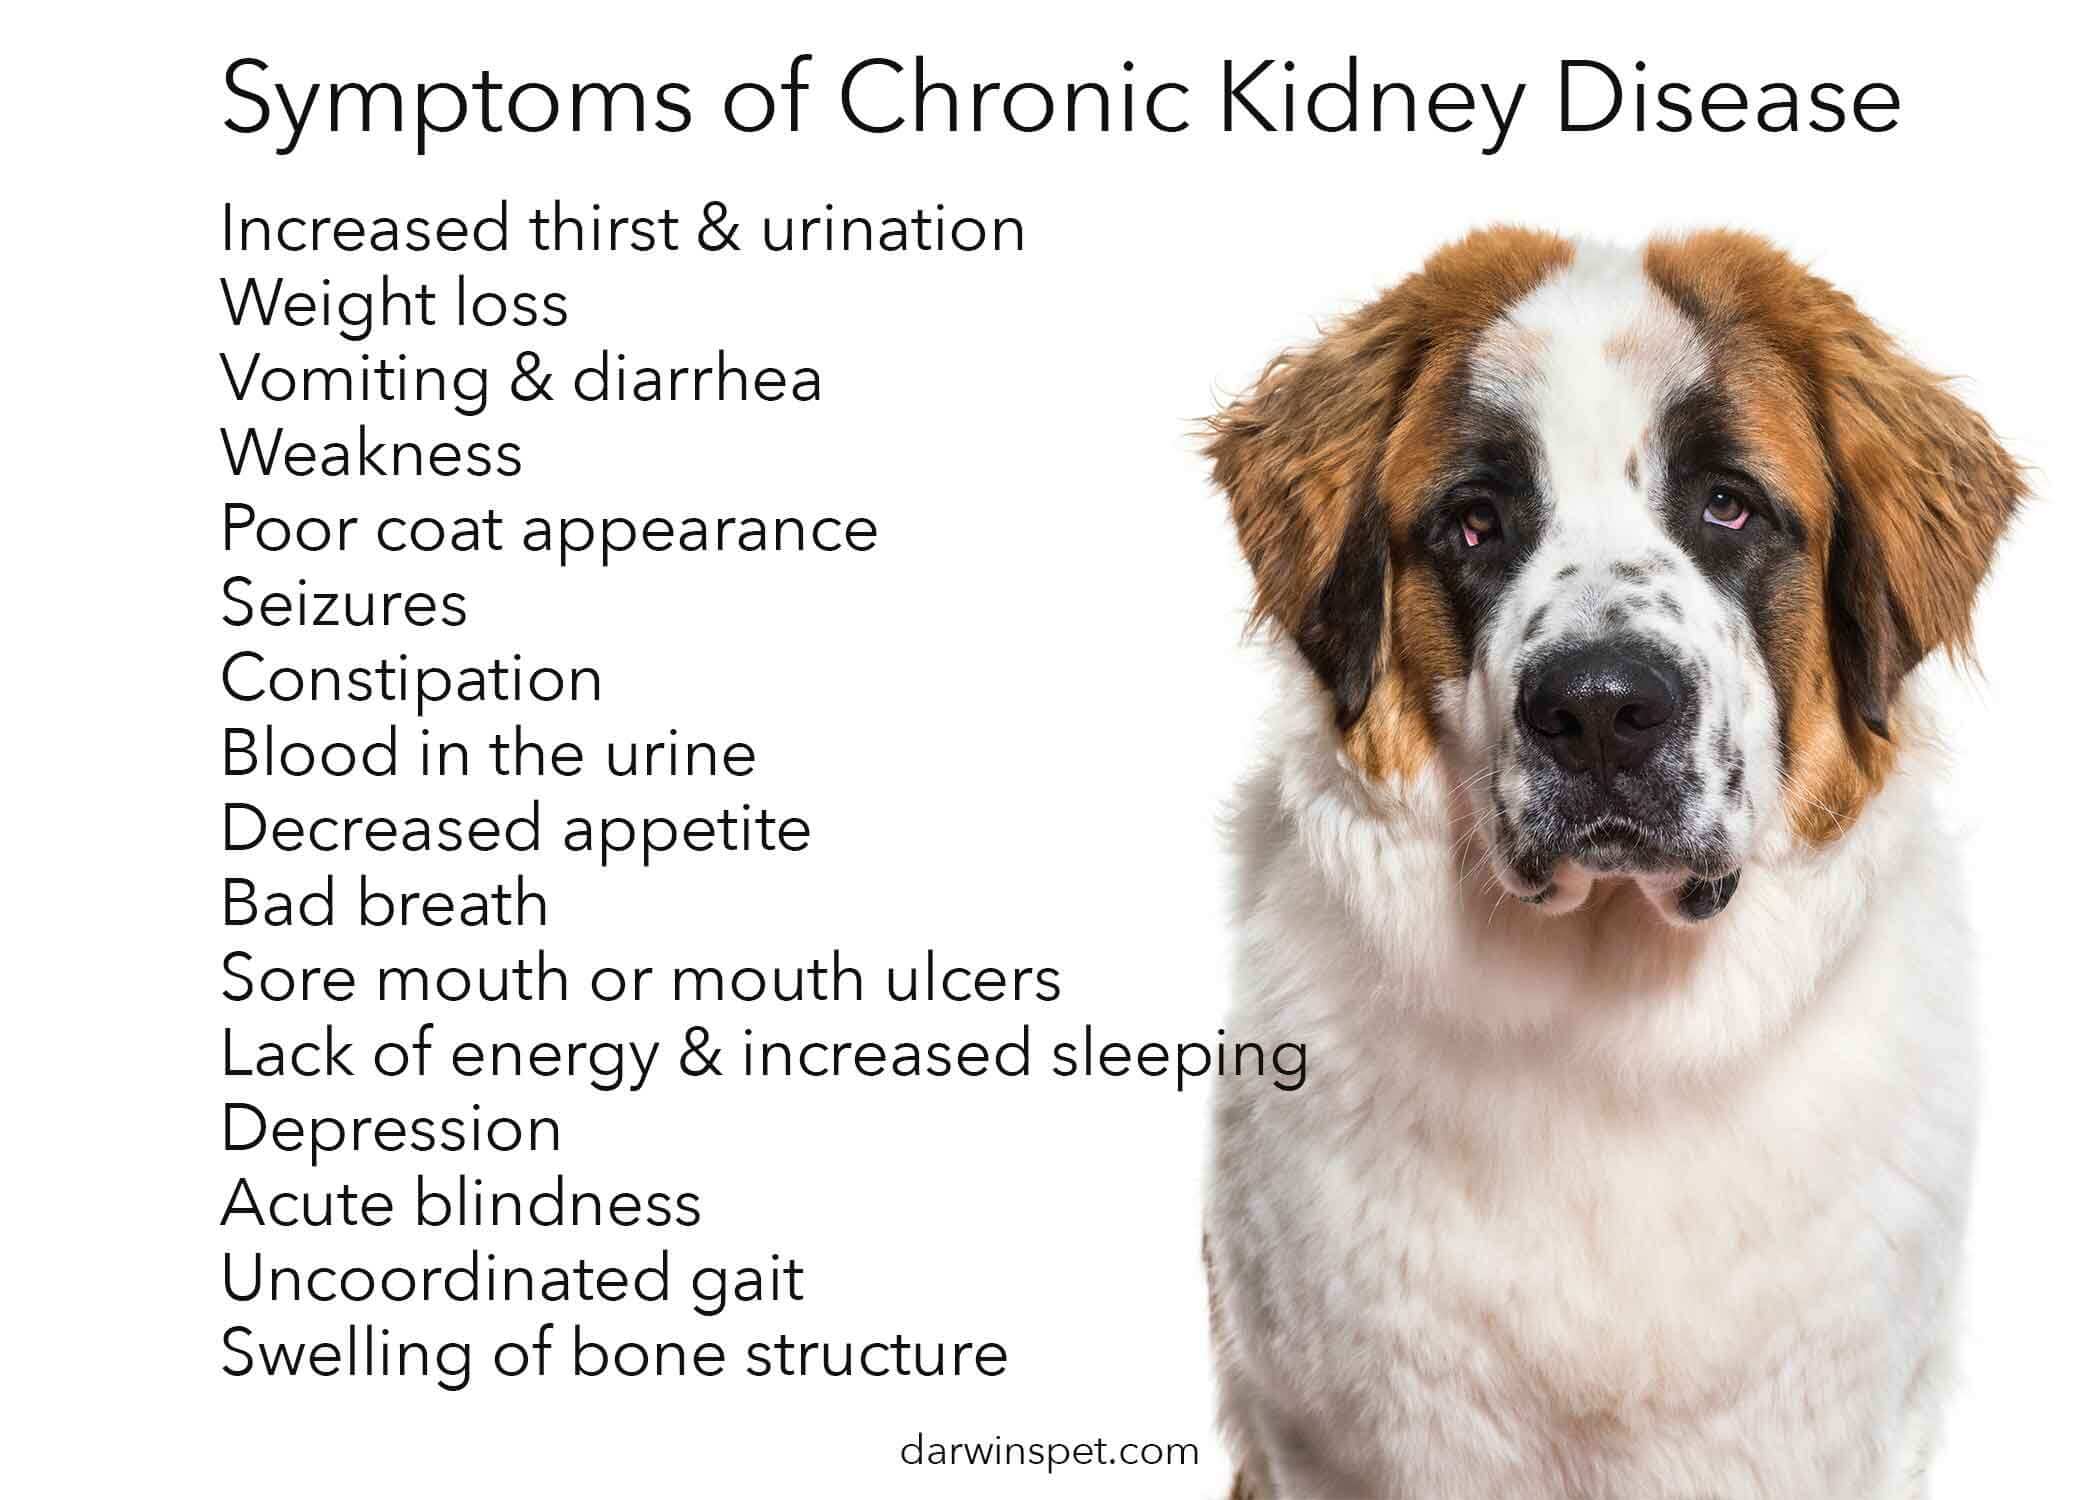 Dog Food for Kidney Disease: How to 